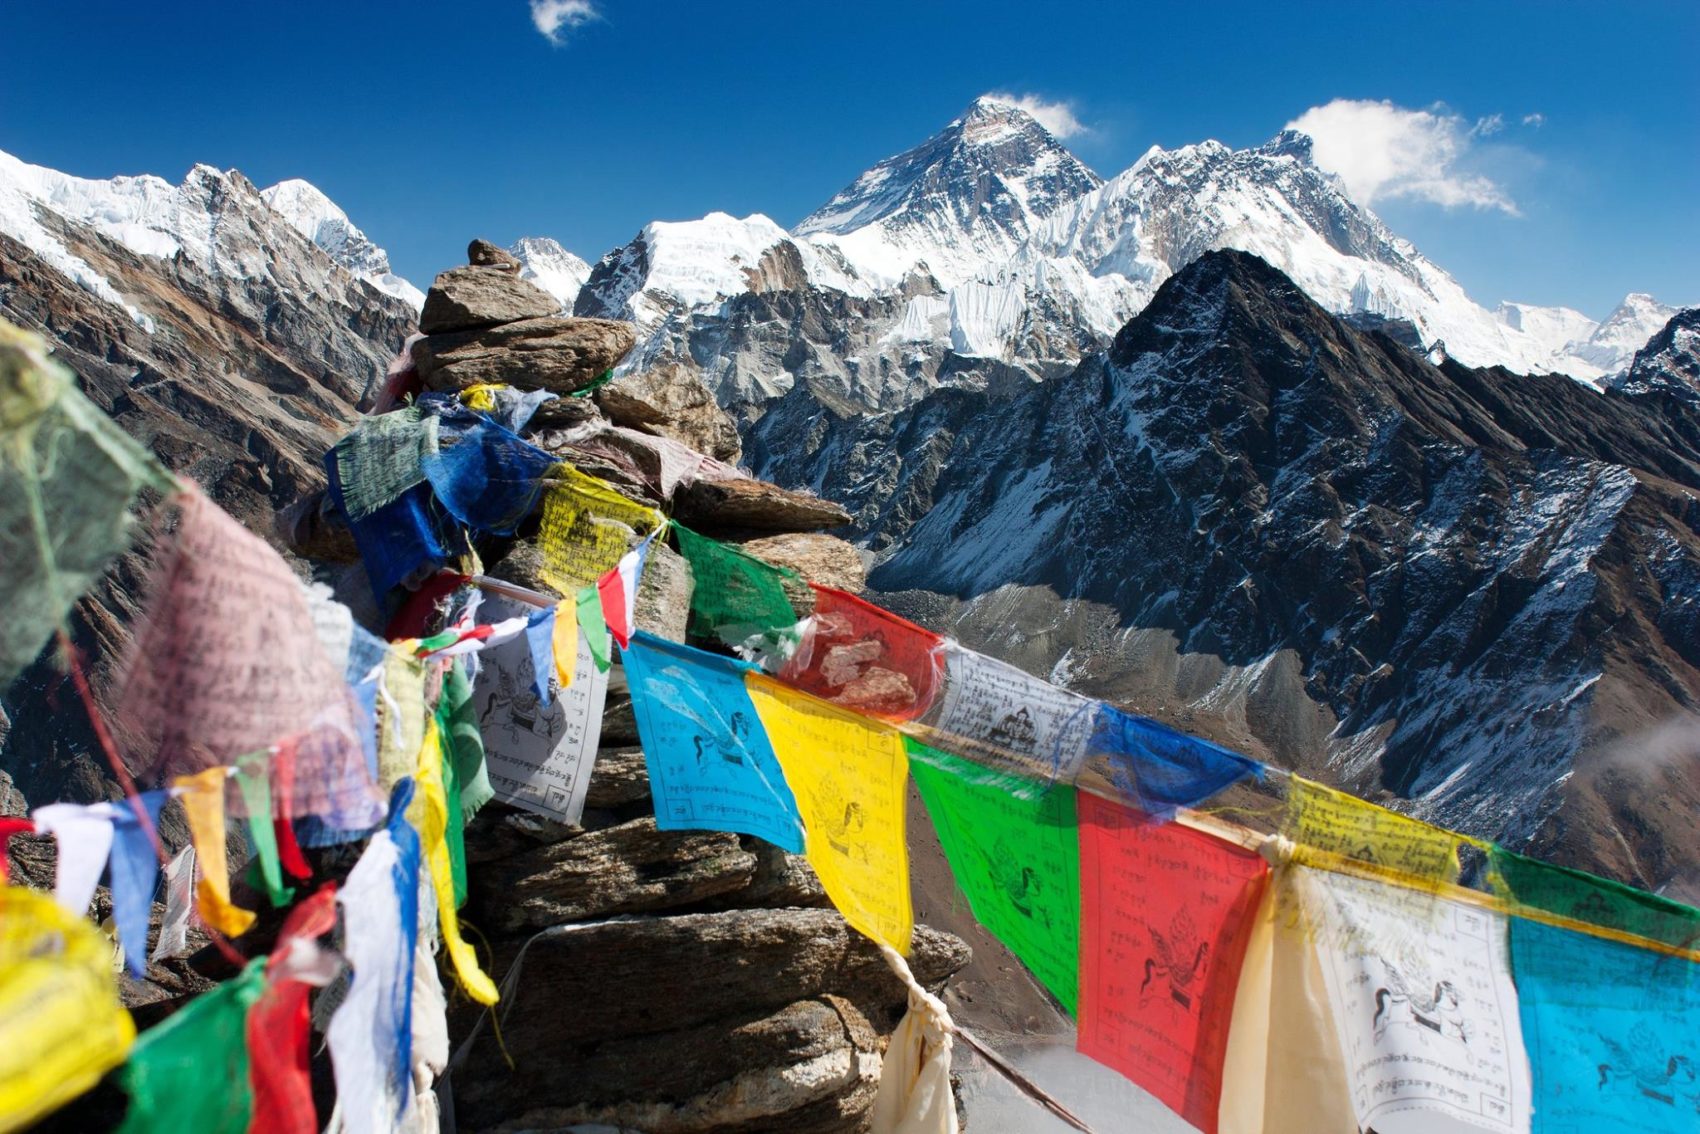 The view from the summit of Gokyo Ri, in the Khumbu region of the Nepal Himalayas.